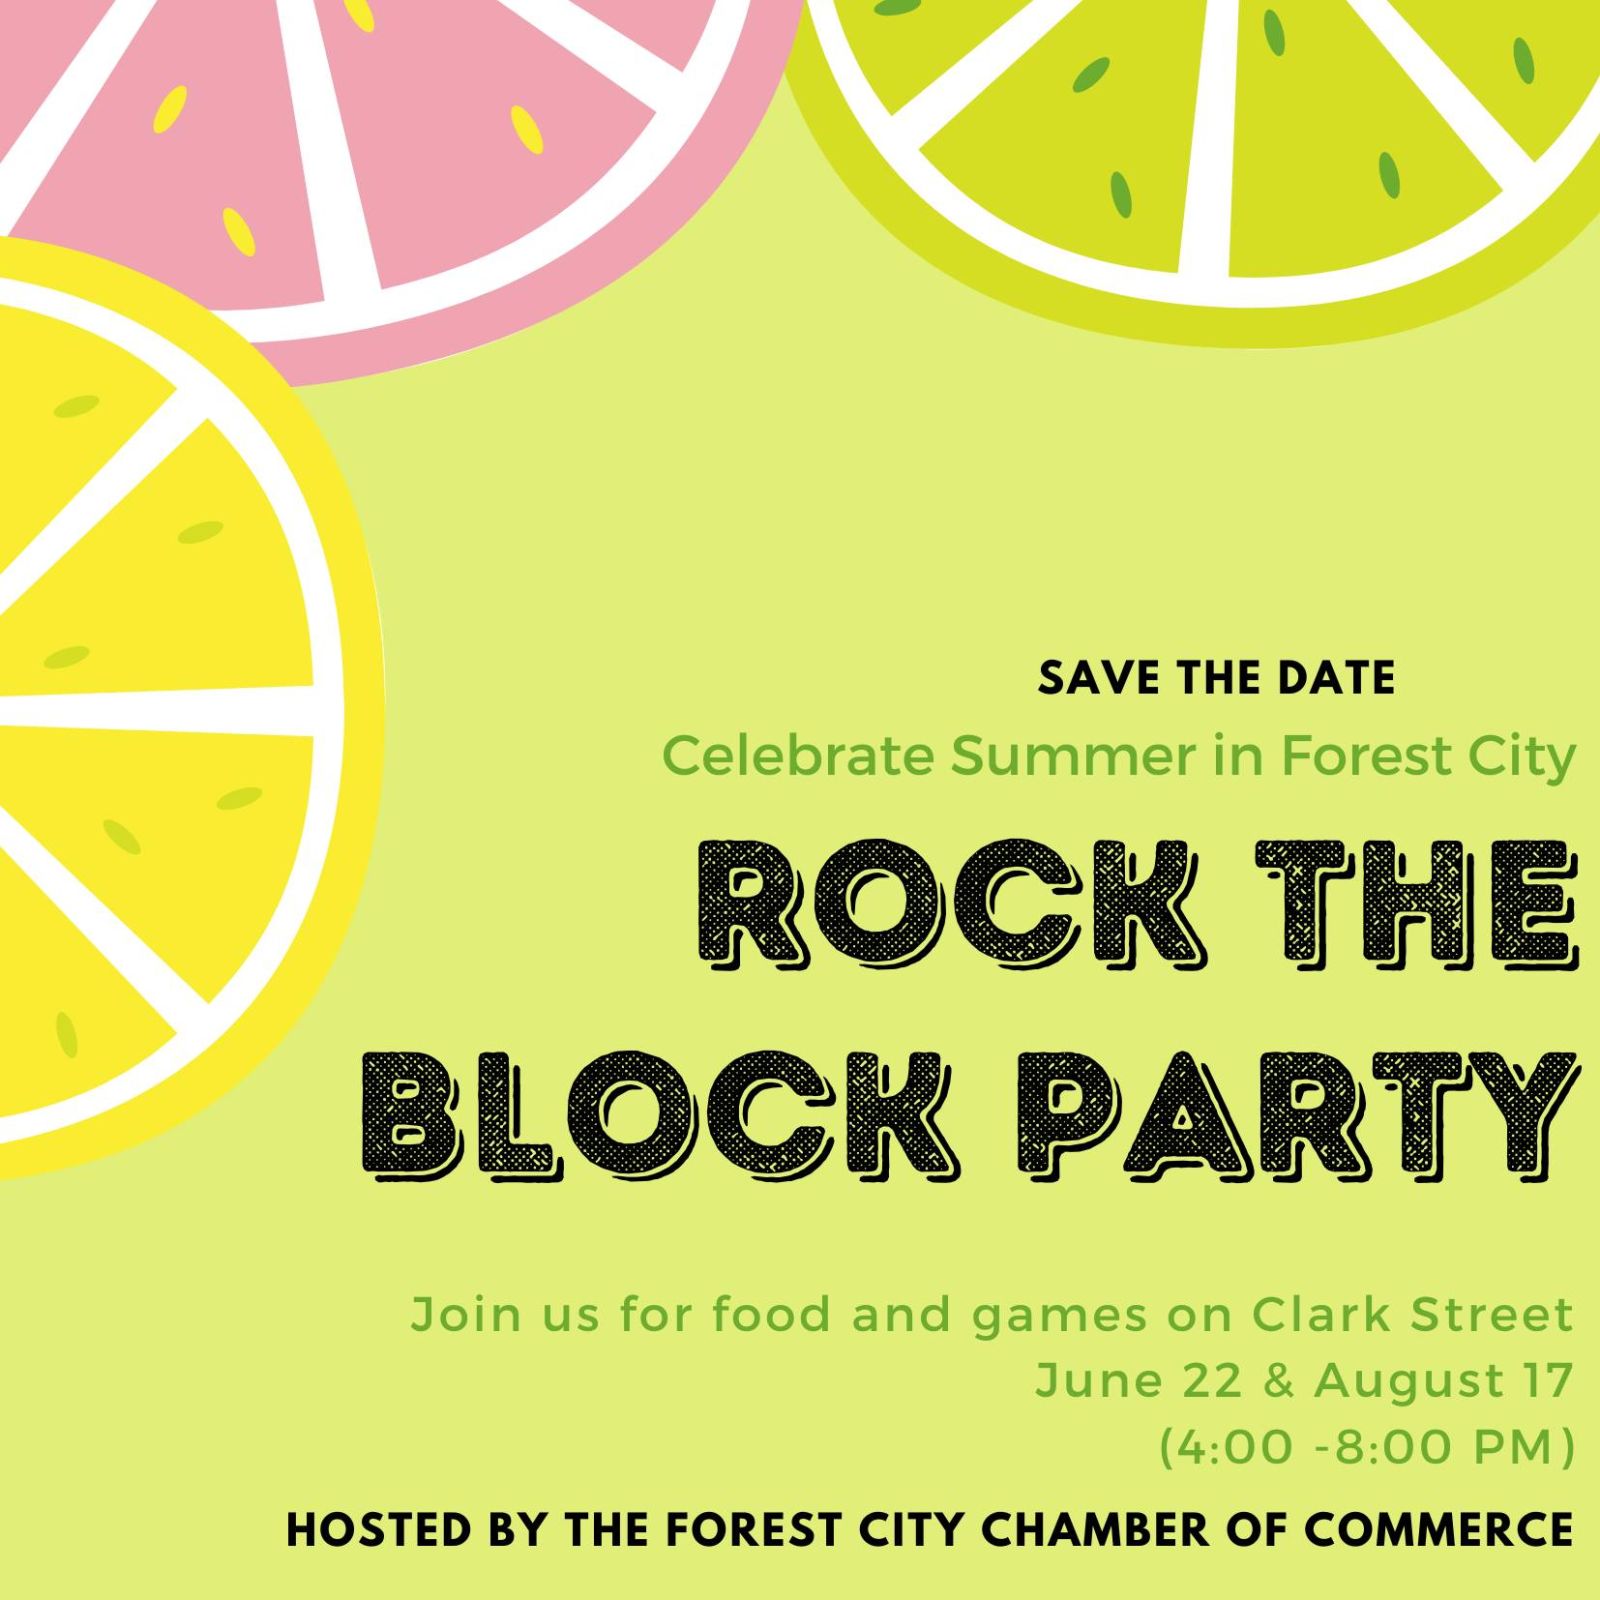 Event Promo Photo For Rock the Block Party